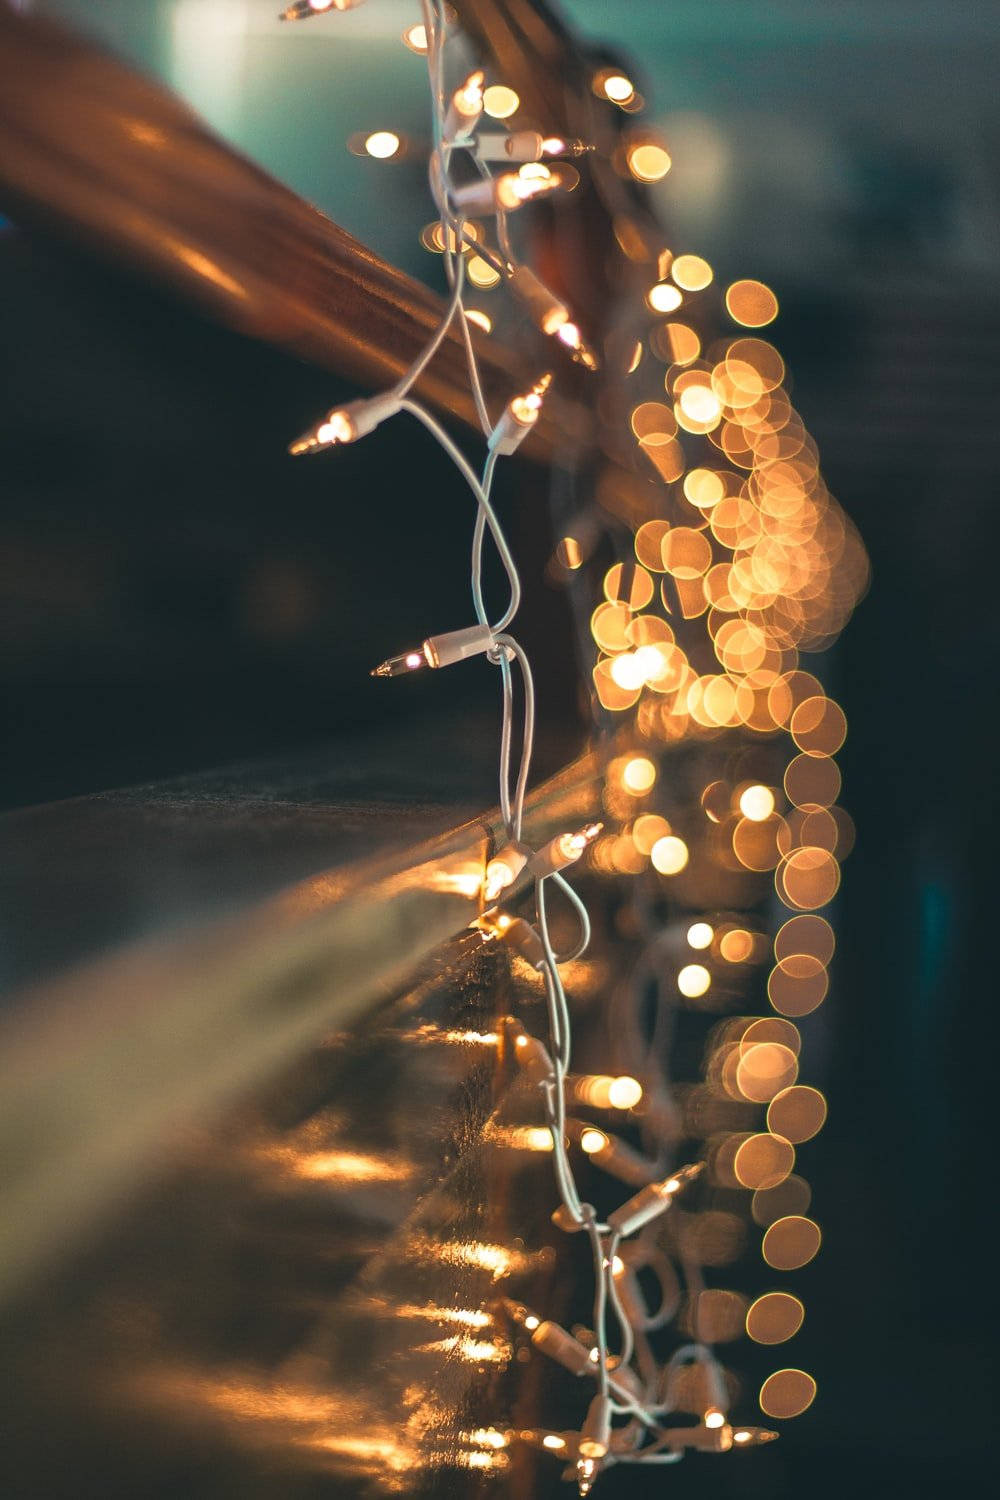 Get into the Christmas spirit with a beautiful festive display of lights Wallpaper